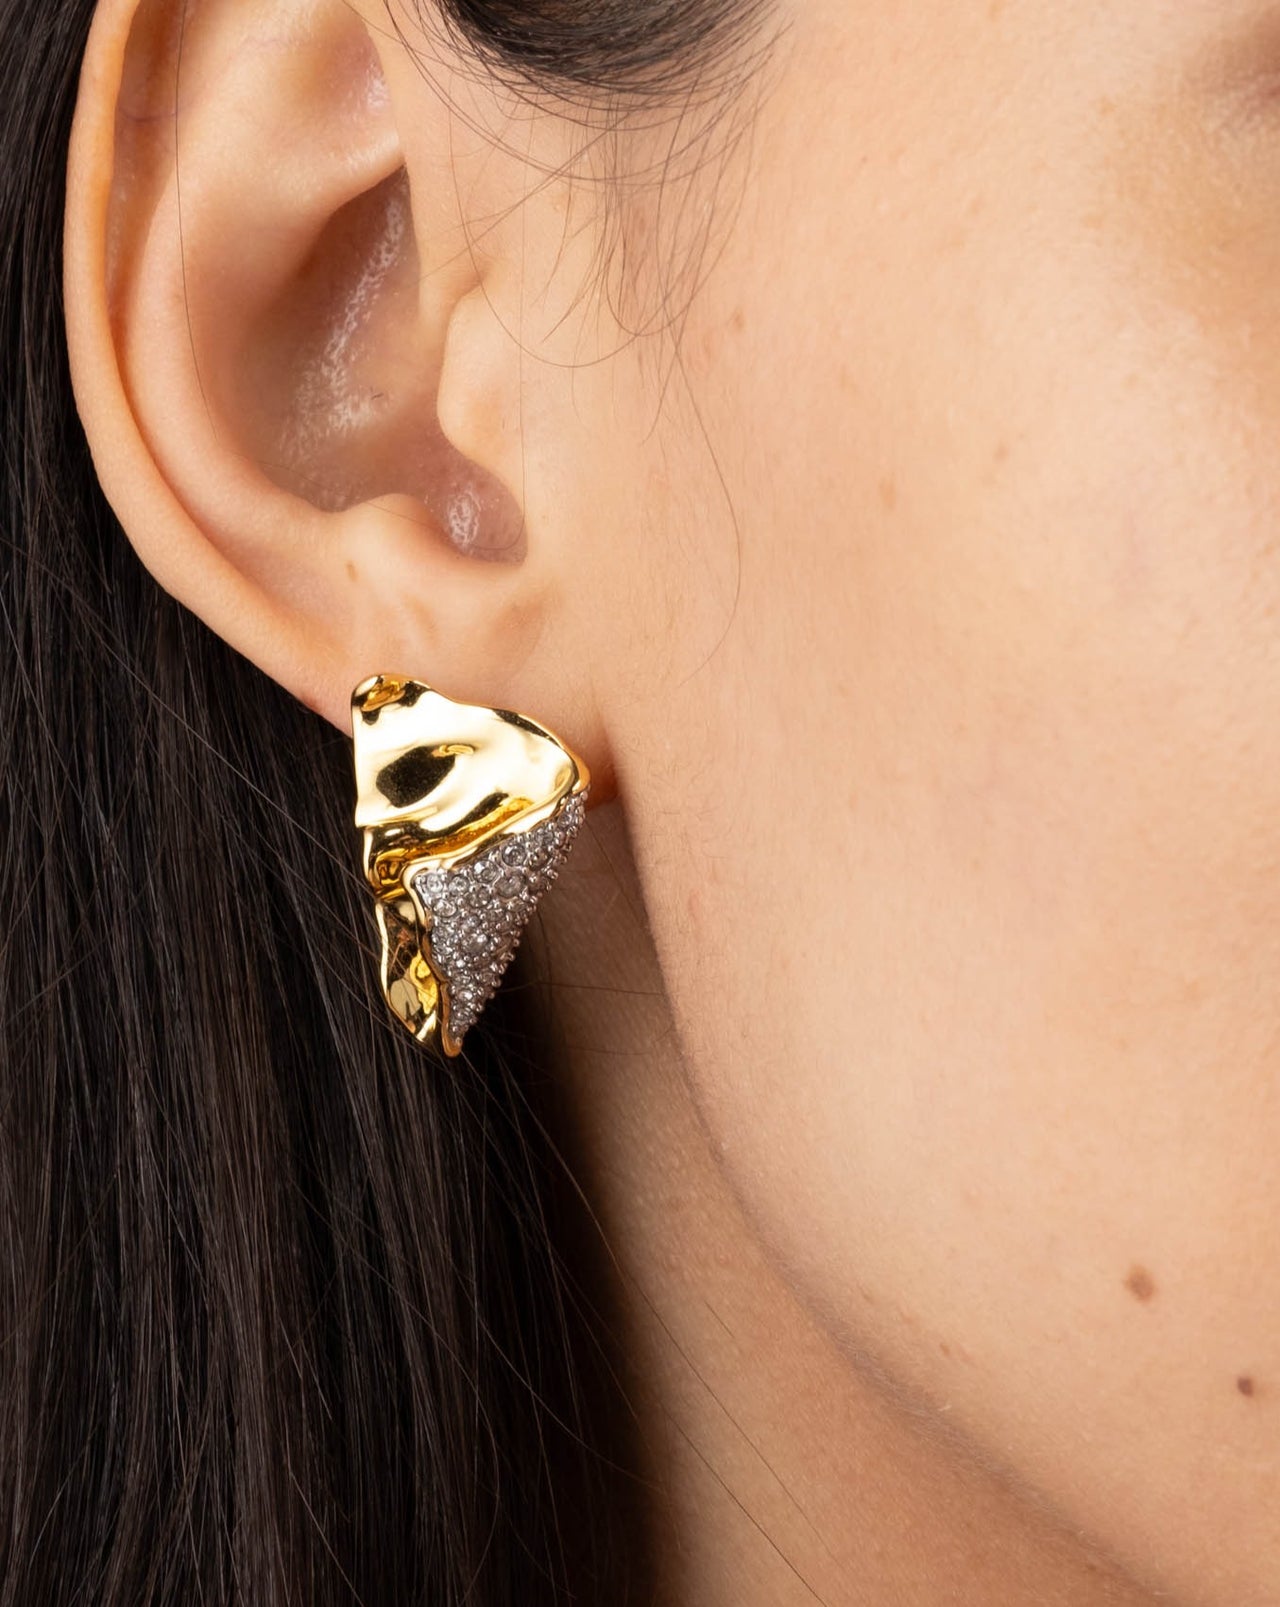 Solanales Gold Crystal Folded Mini Earring - Photo 2